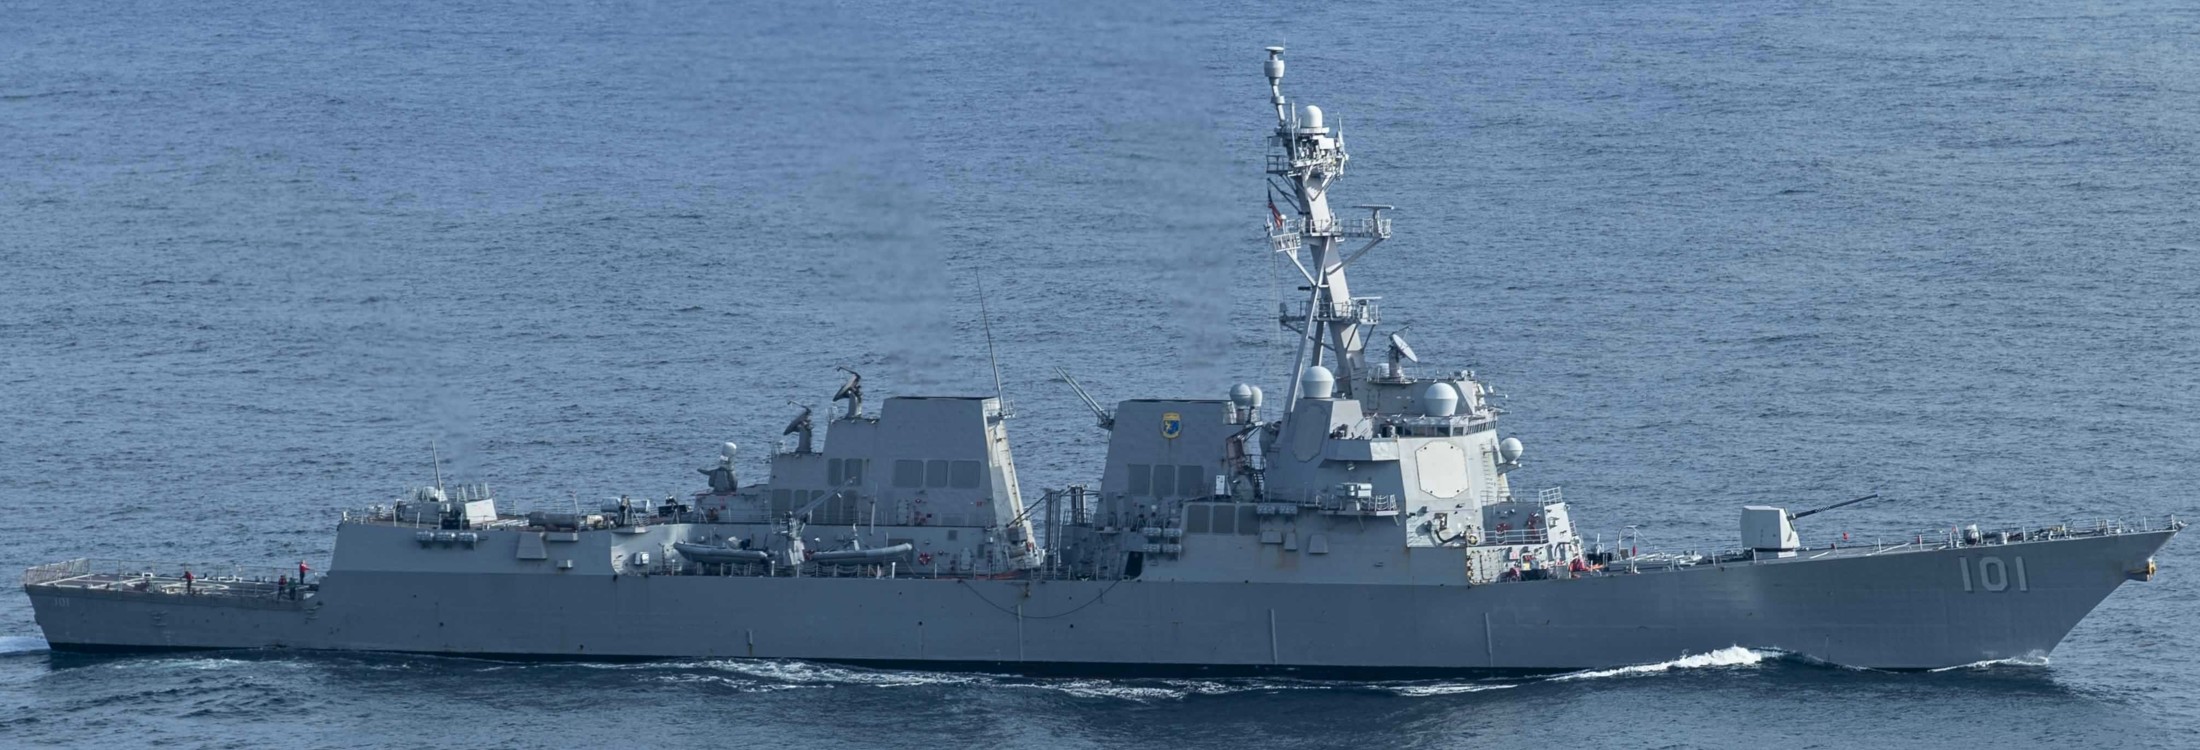 ddg-101 uss gridley arleigh burke class guided missile destroyer aegis us navy 73